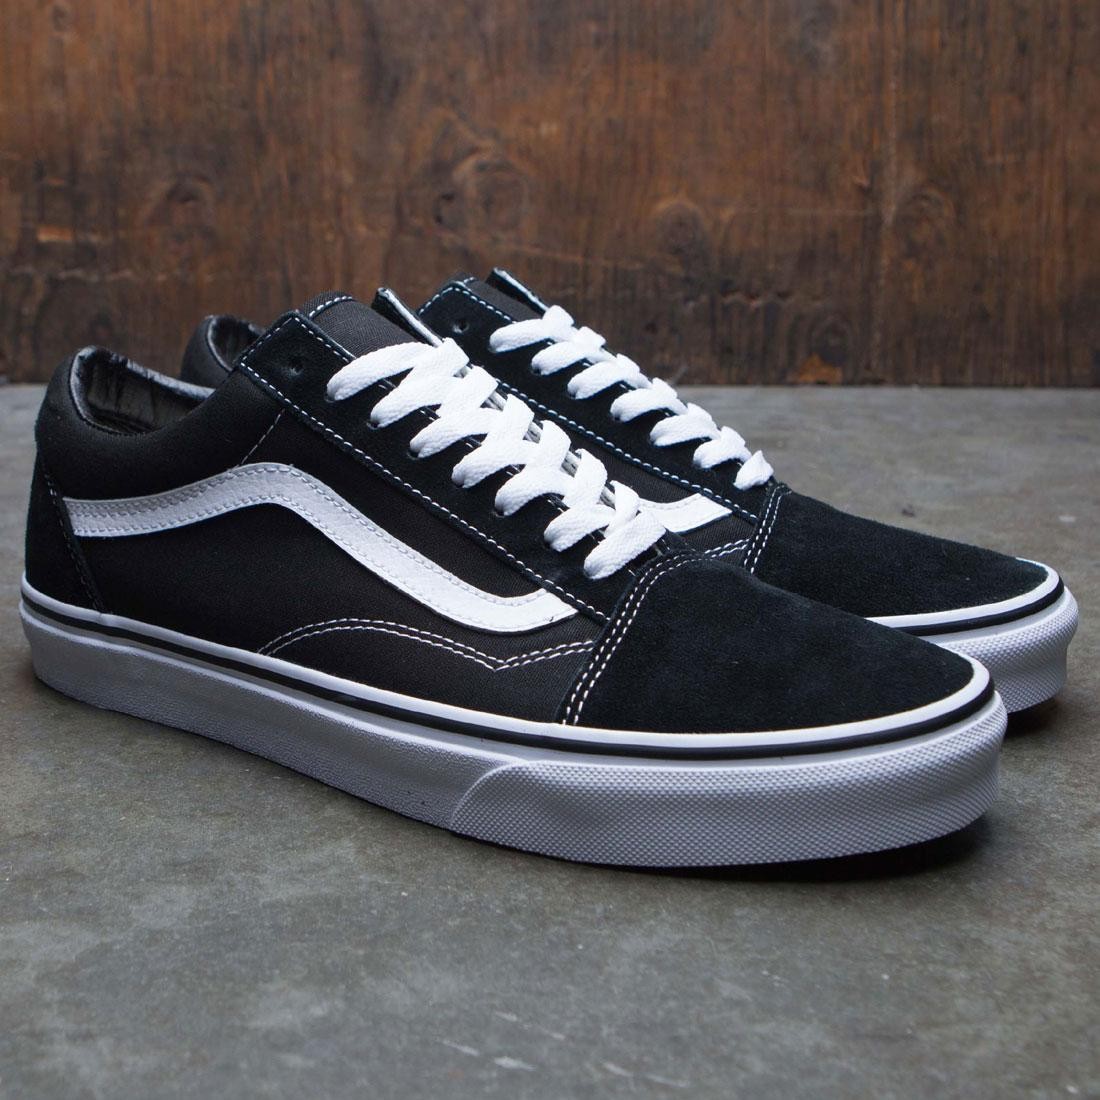 Collection 103+ Wallpaper Black And White Vans Low Top Sharp